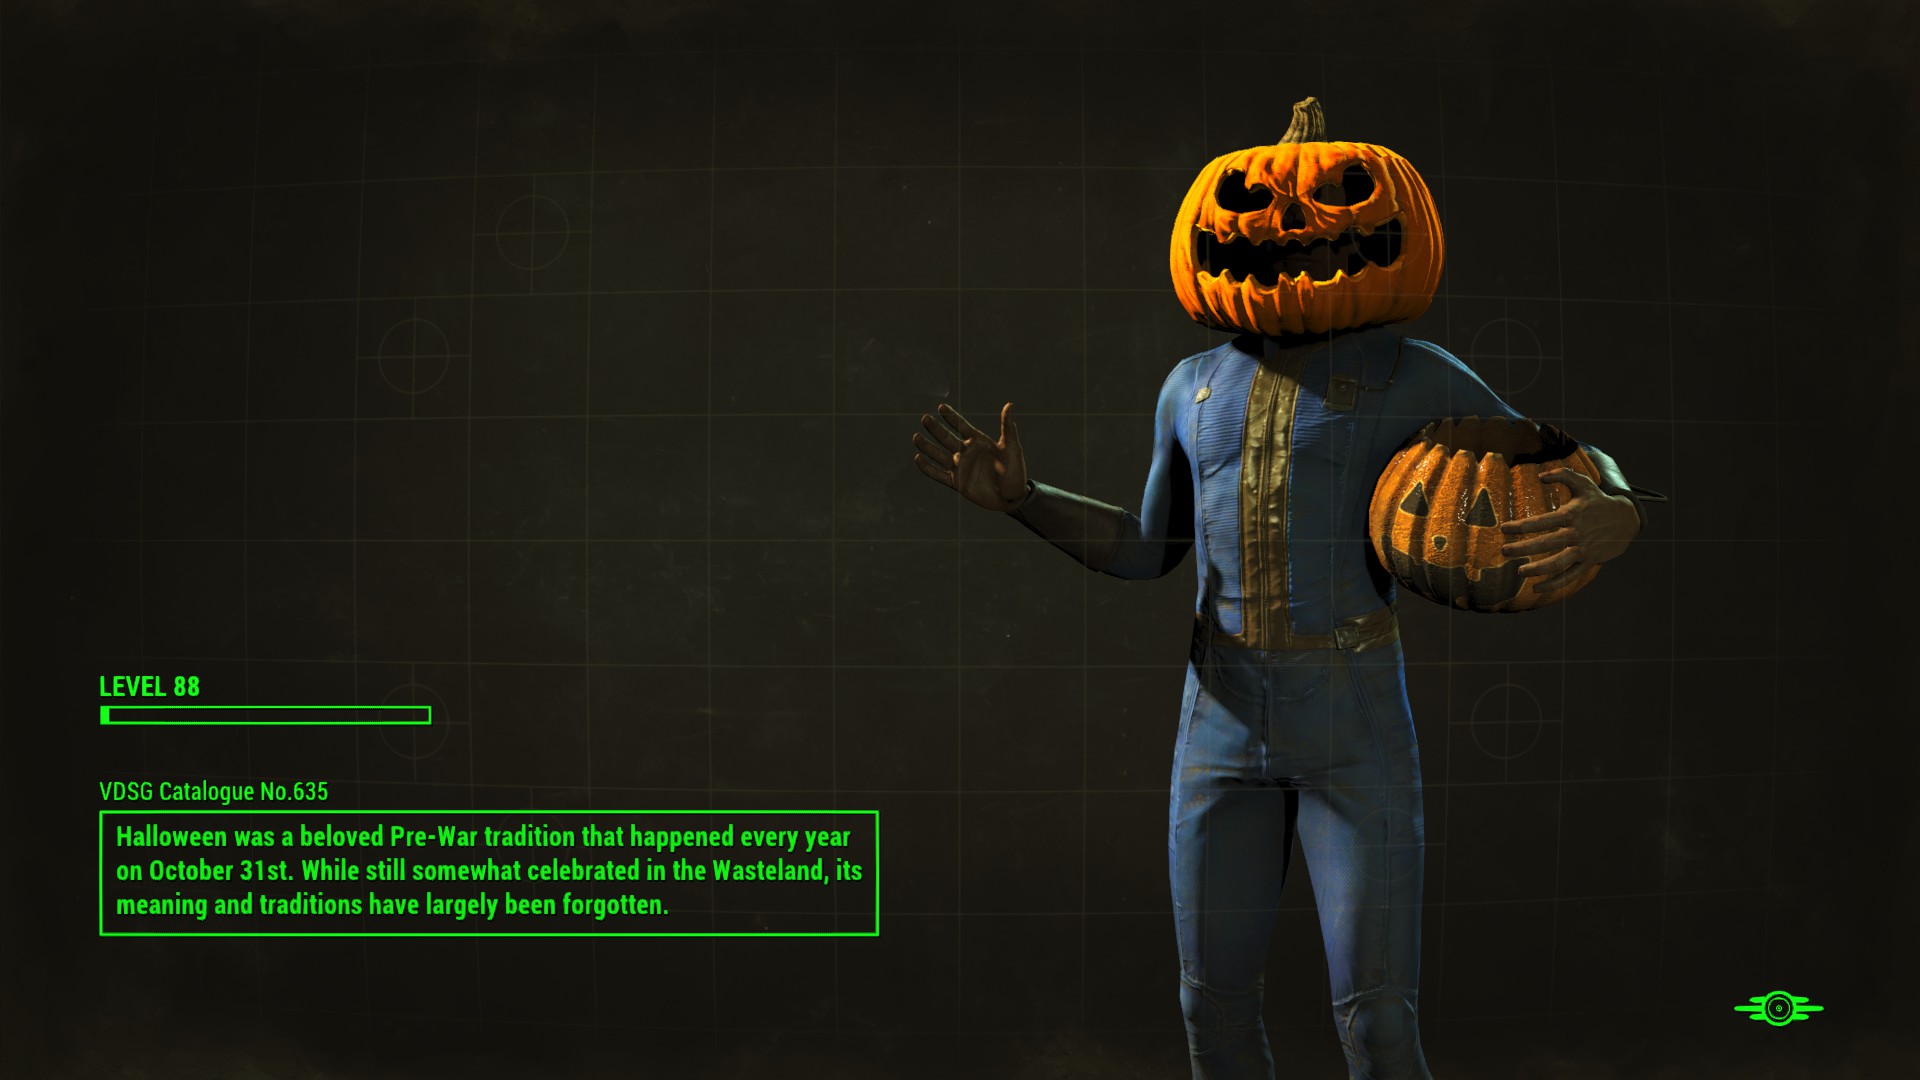 funny gaming memes - pumpkin in fallout 4 - Level 88 Vdsg Catalogue No.635 Halloween was a beloved PreWar tradition that happened every year on October 31st. While still somewhat celebrated in the Wasteland, its meaning and traditions have largely been fo